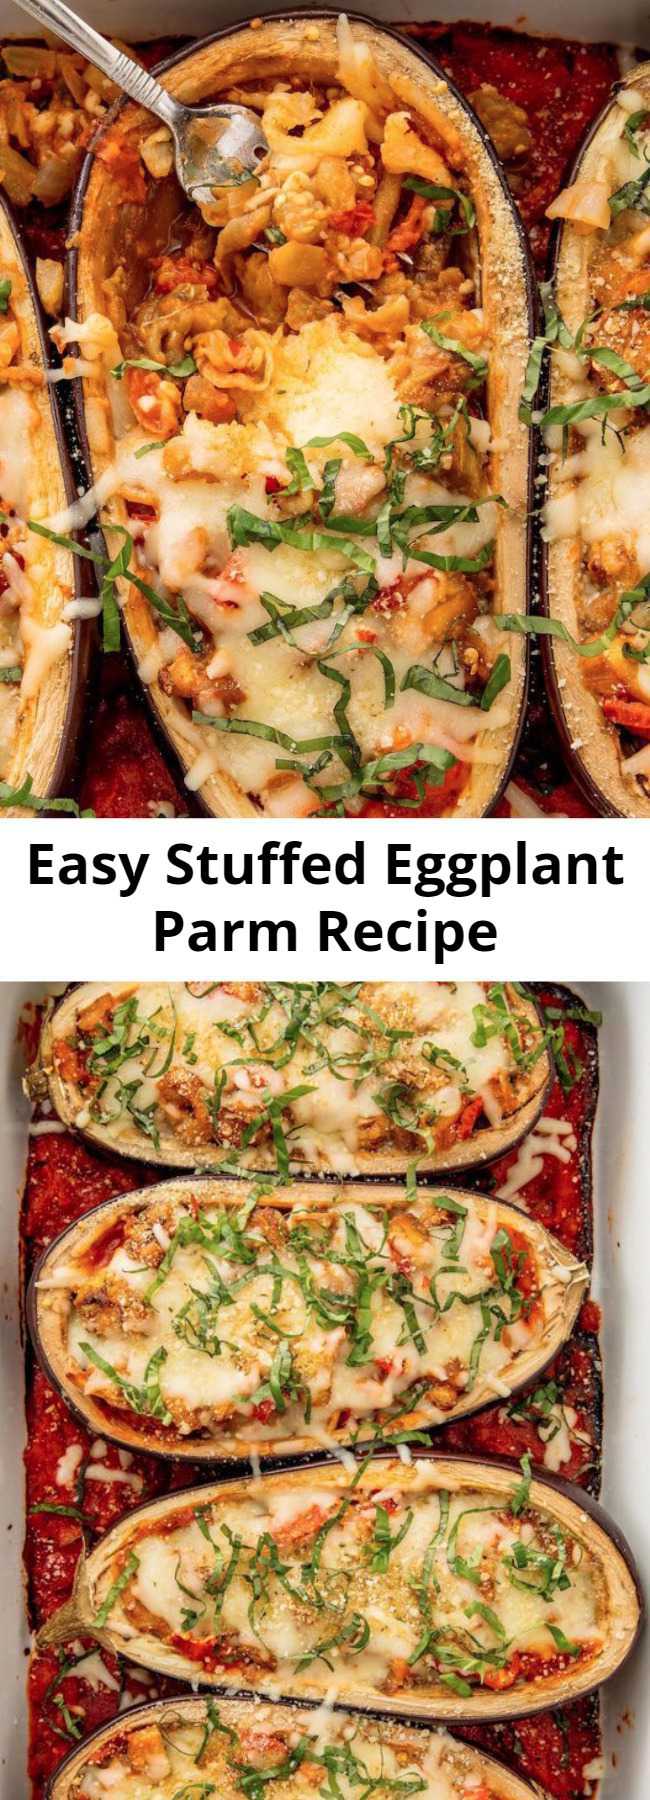 Easy Stuffed Eggplant Parm Recipe - Stuffed Eggplant Parm is the low-carb dinner that will make you actually want to eat vegetables. You won't miss the pasta.